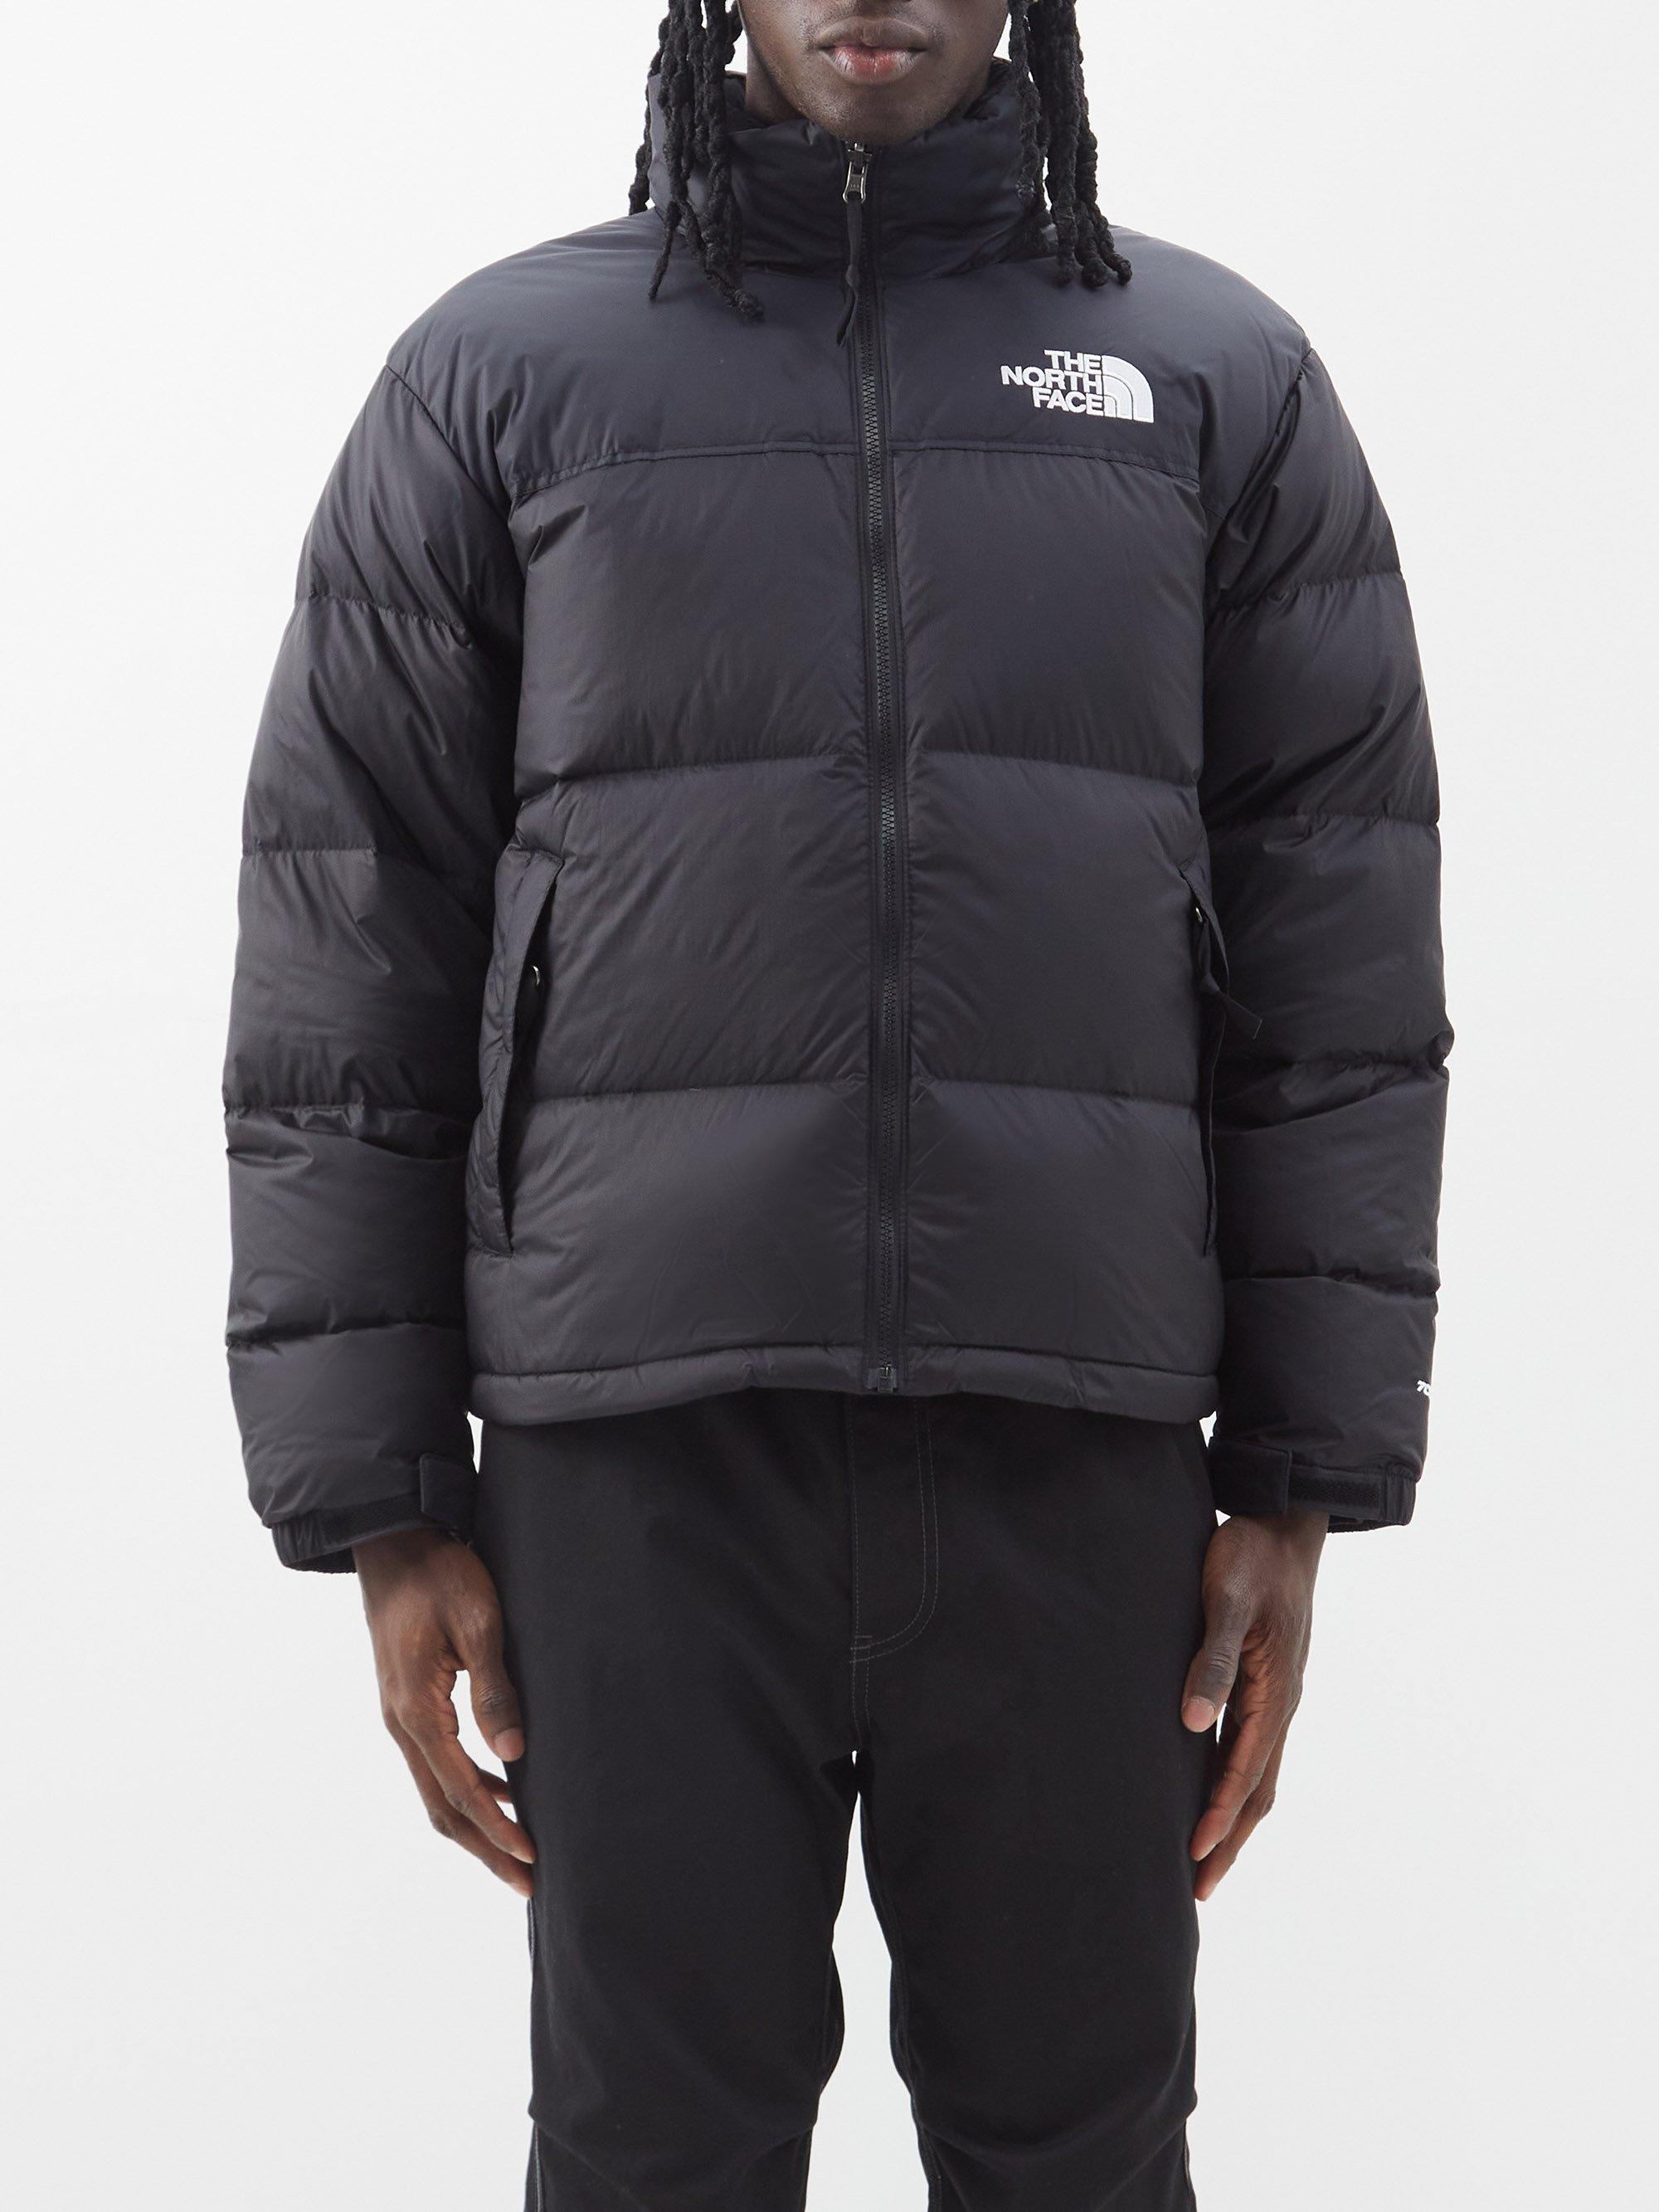 The North Face 1996 Retro Nuptse Jacket in Black for Men | Lyst UK